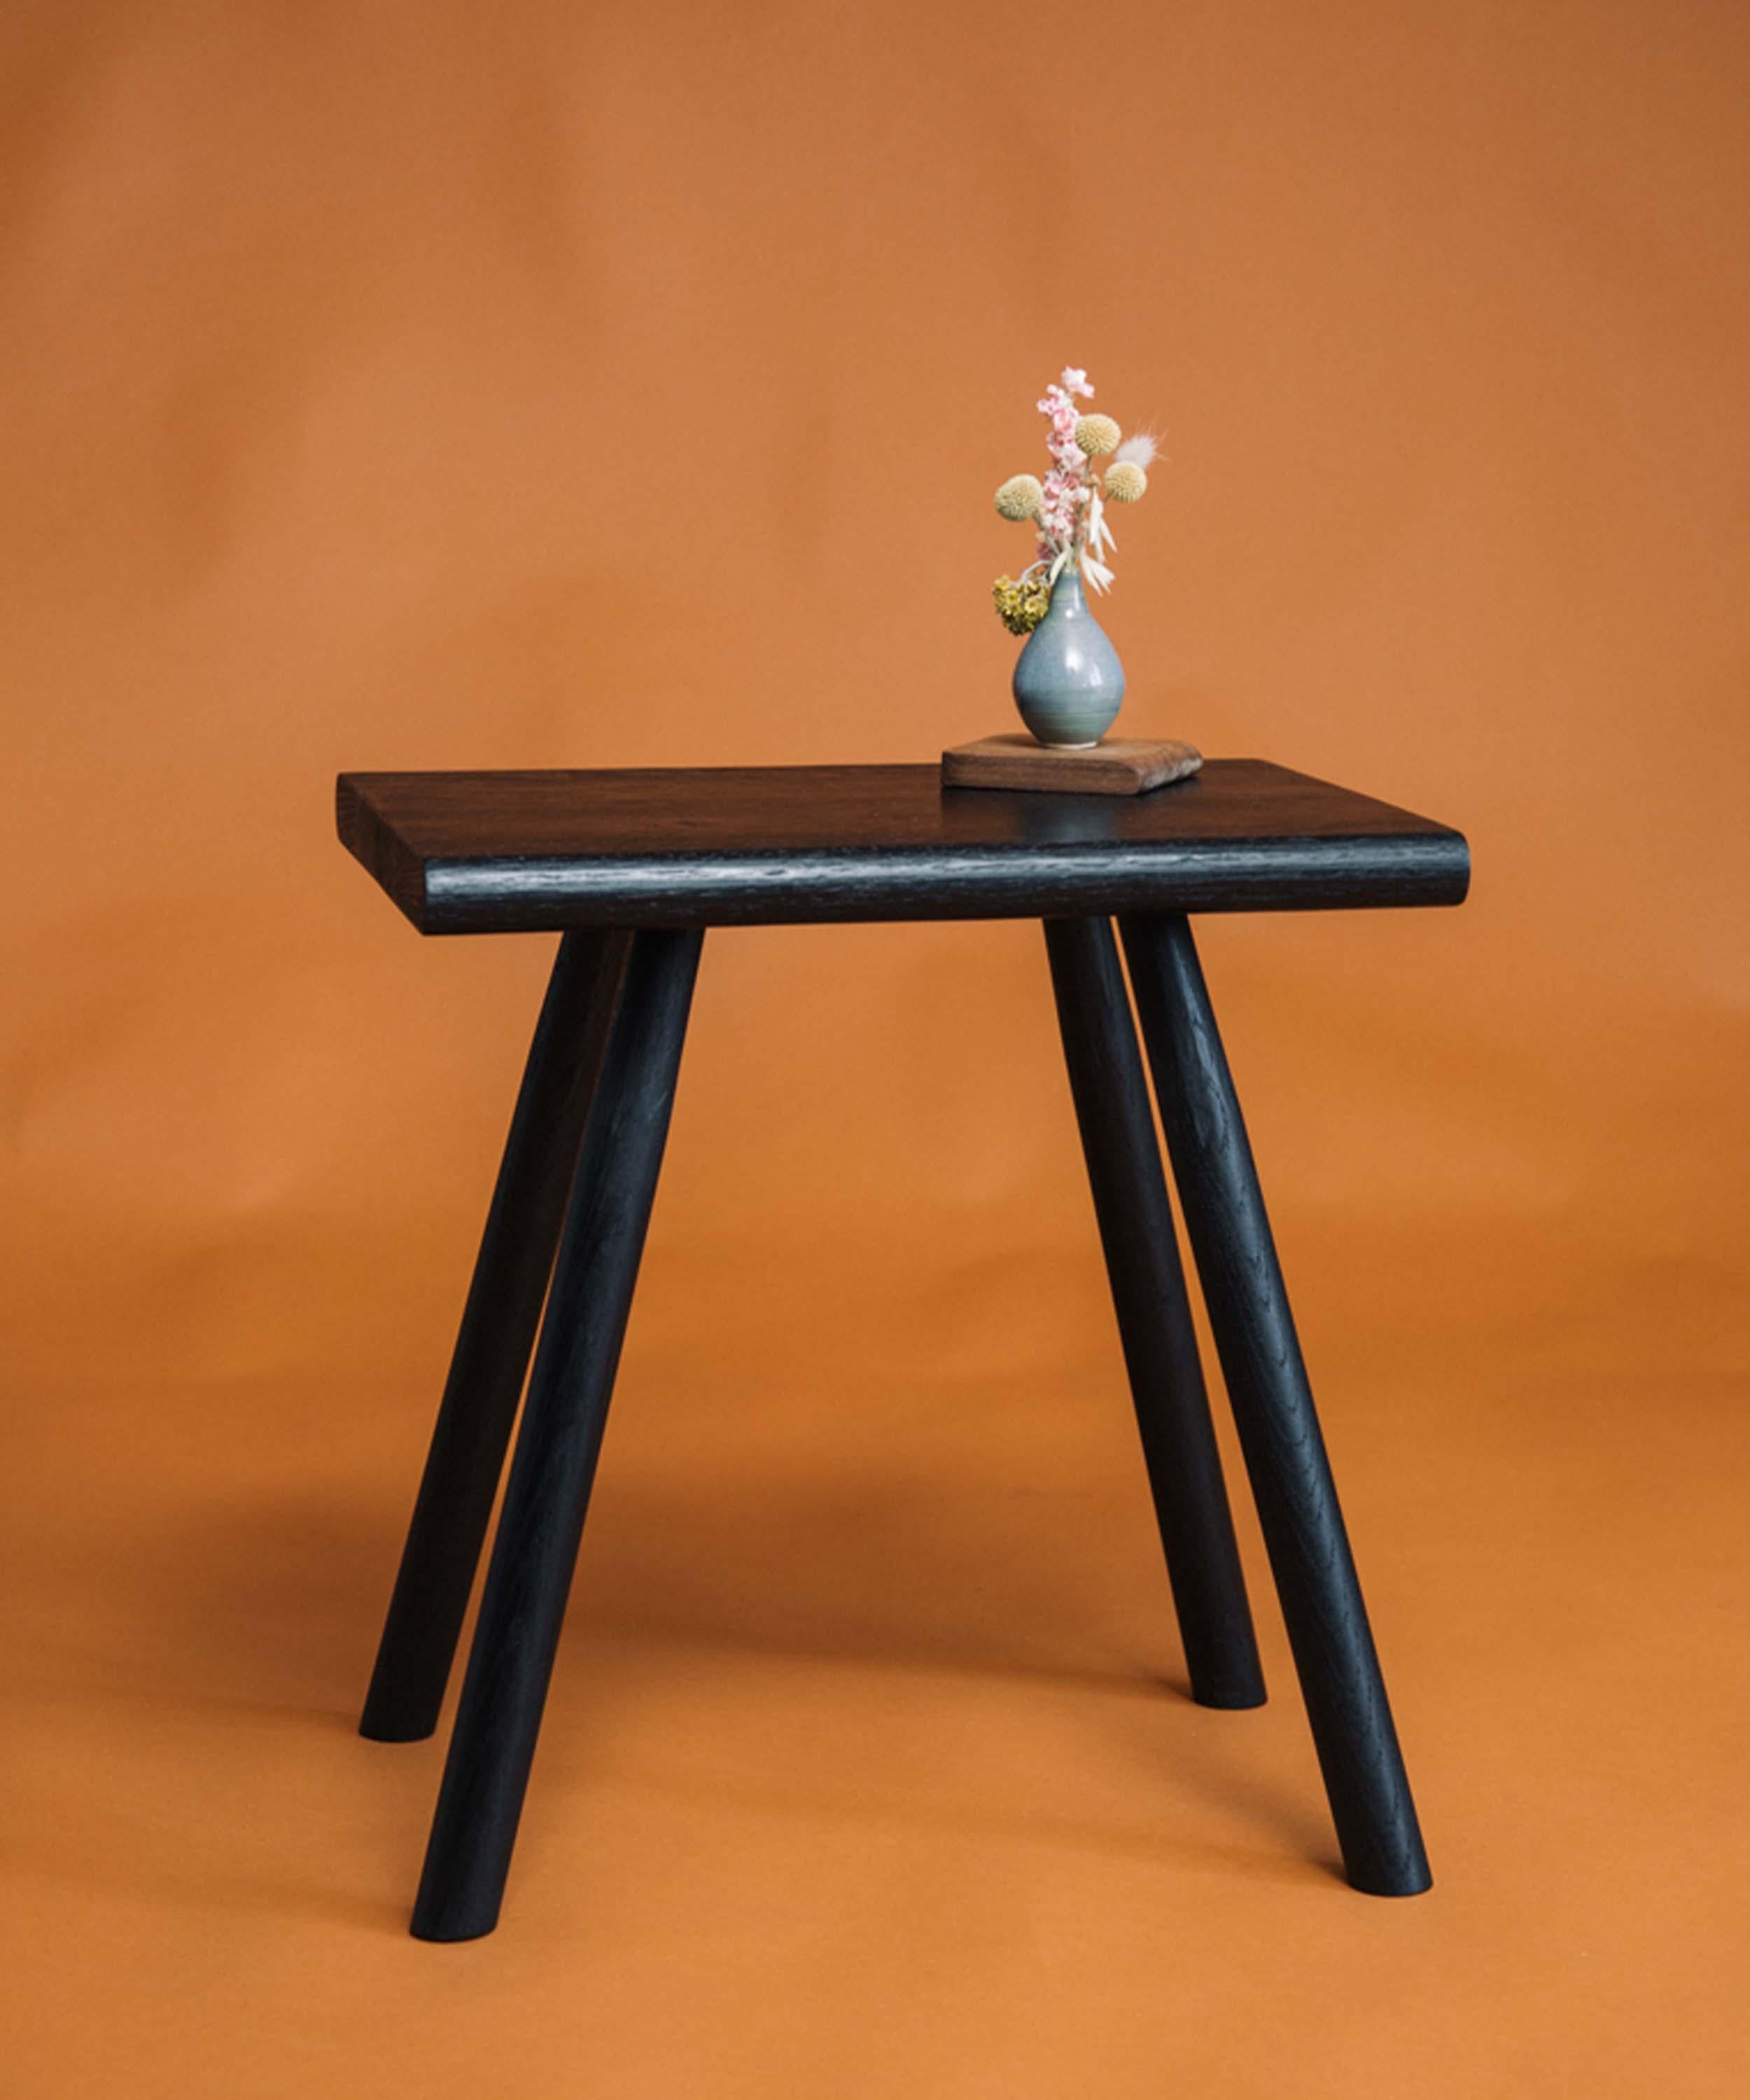 This hand crafted wood stool and side table made of English Oak and dyed black is perfect for use in any room, from bedside table to living room seating.
It is large enough to comfortably sit on, whilst also being perfect to work next to a sofa, to